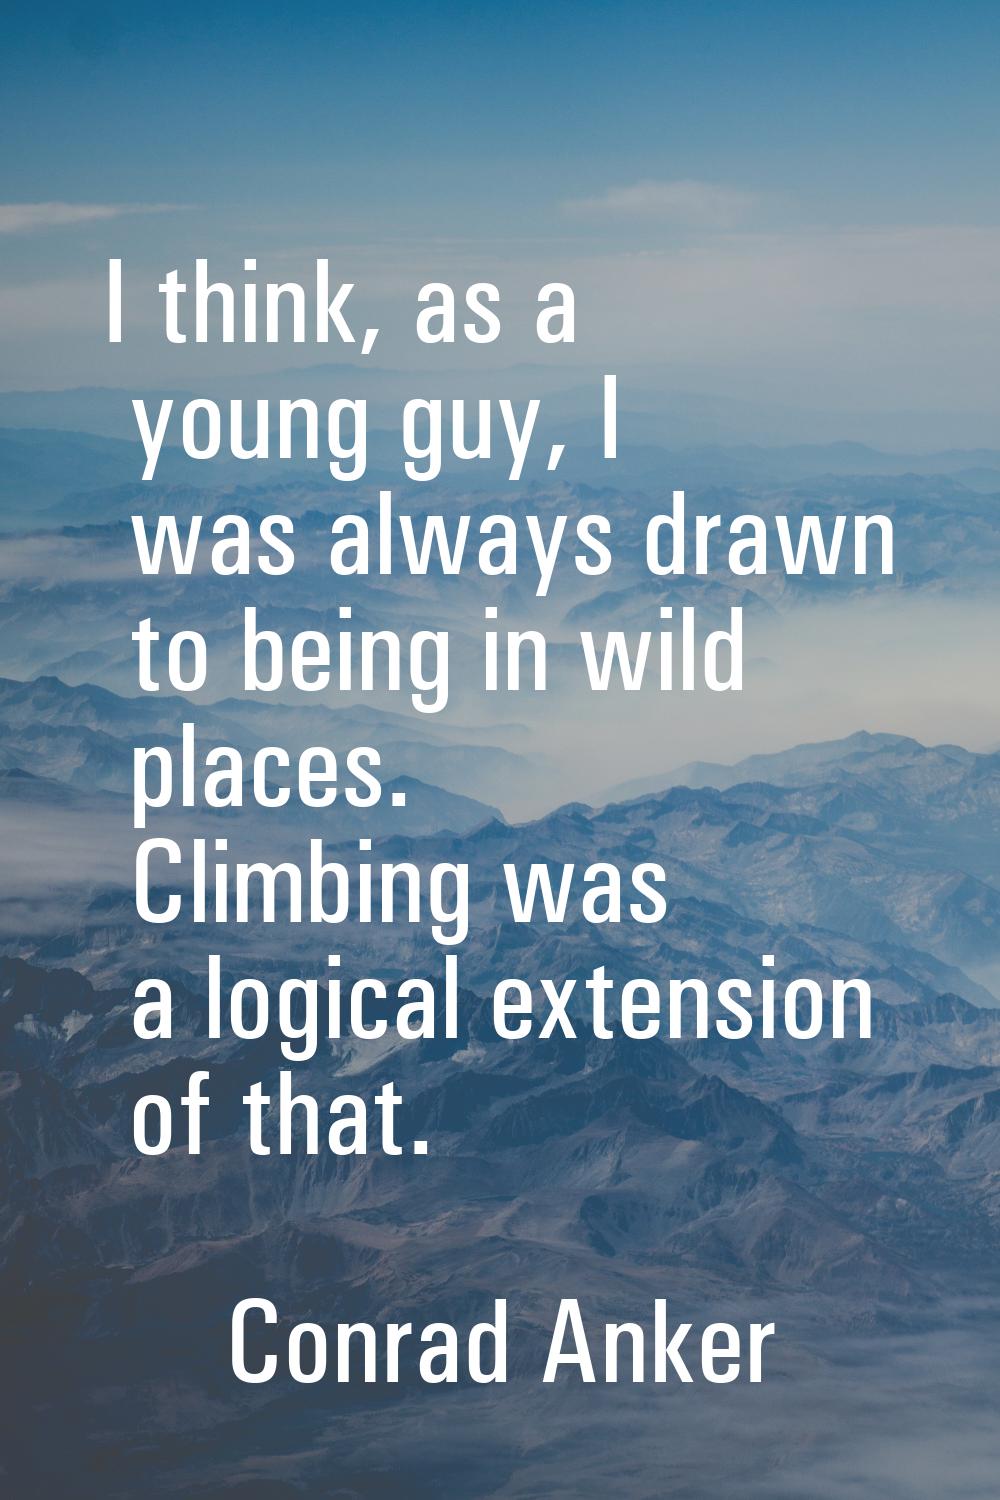 I think, as a young guy, I was always drawn to being in wild places. Climbing was a logical extensi